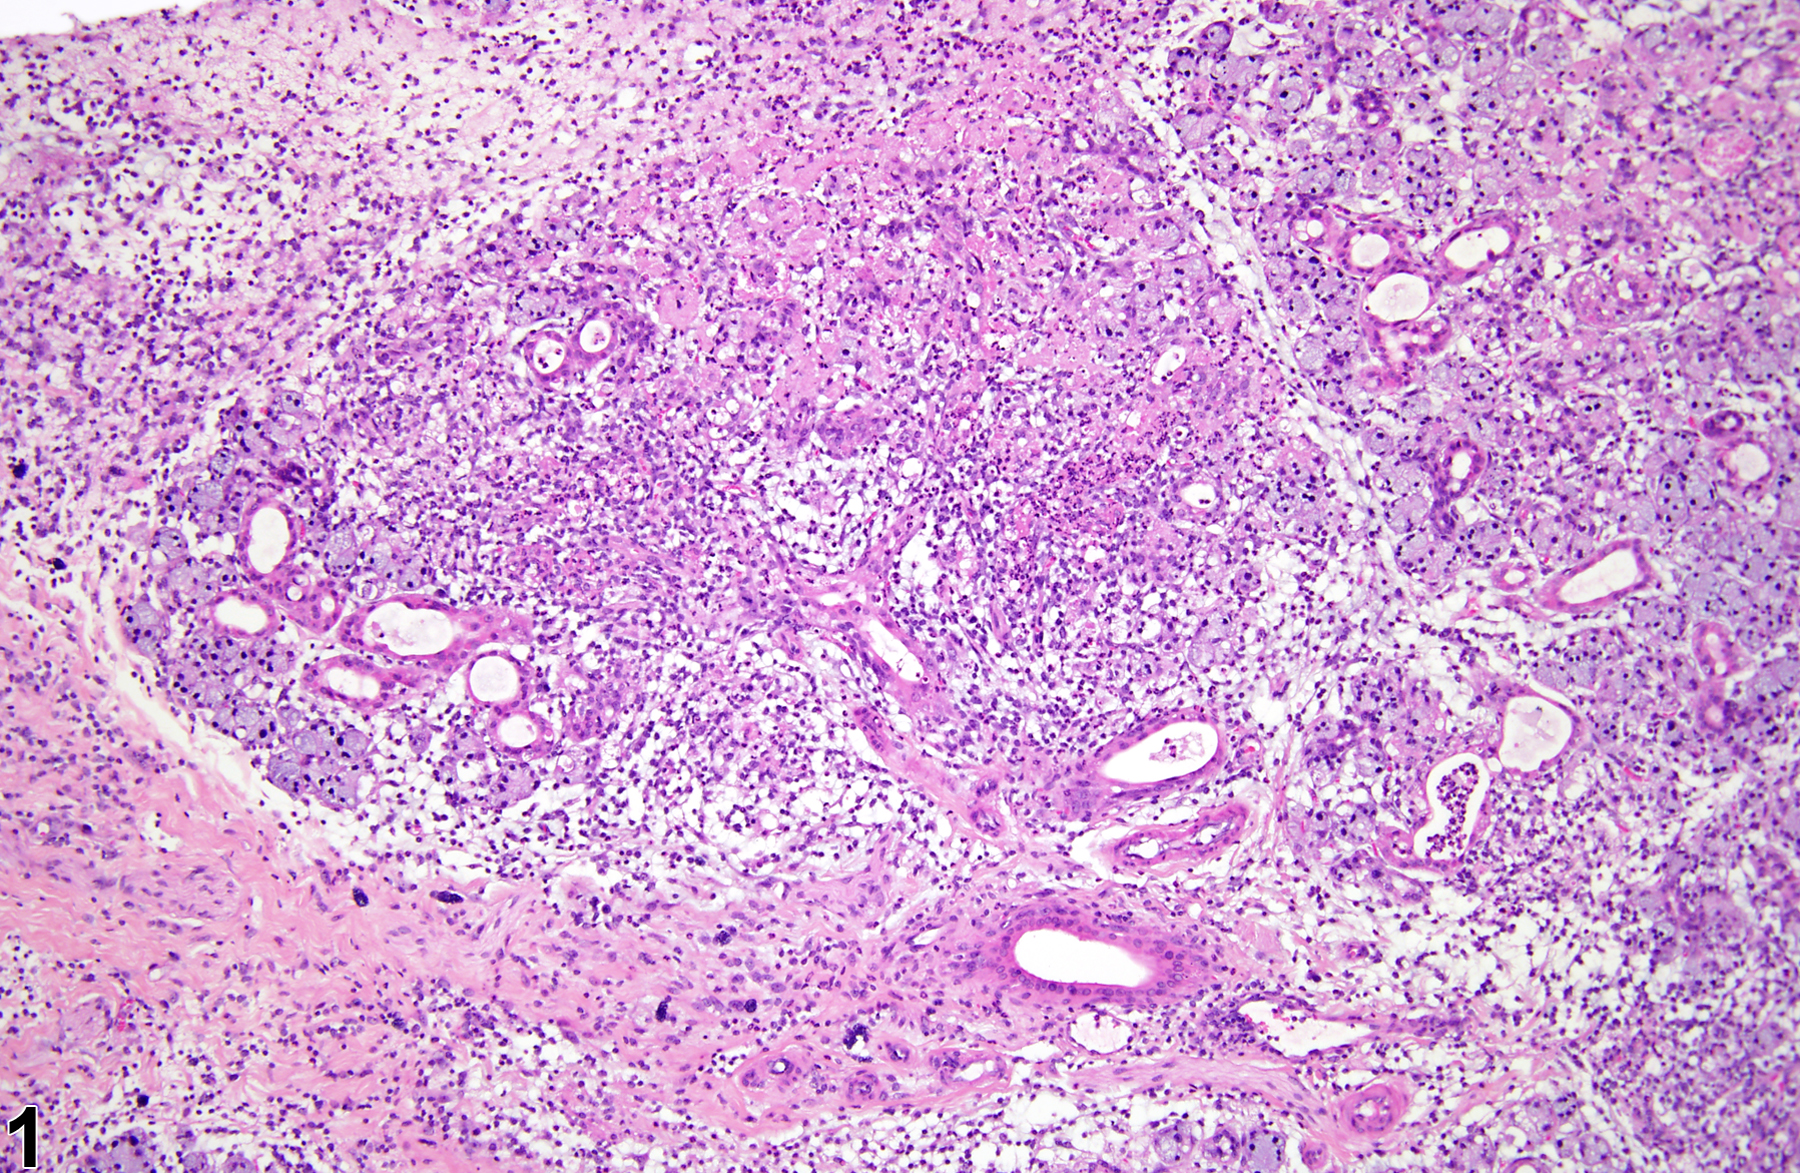 Image of necrosis in the salivary gland from a male F344/N rat in a subchronic study